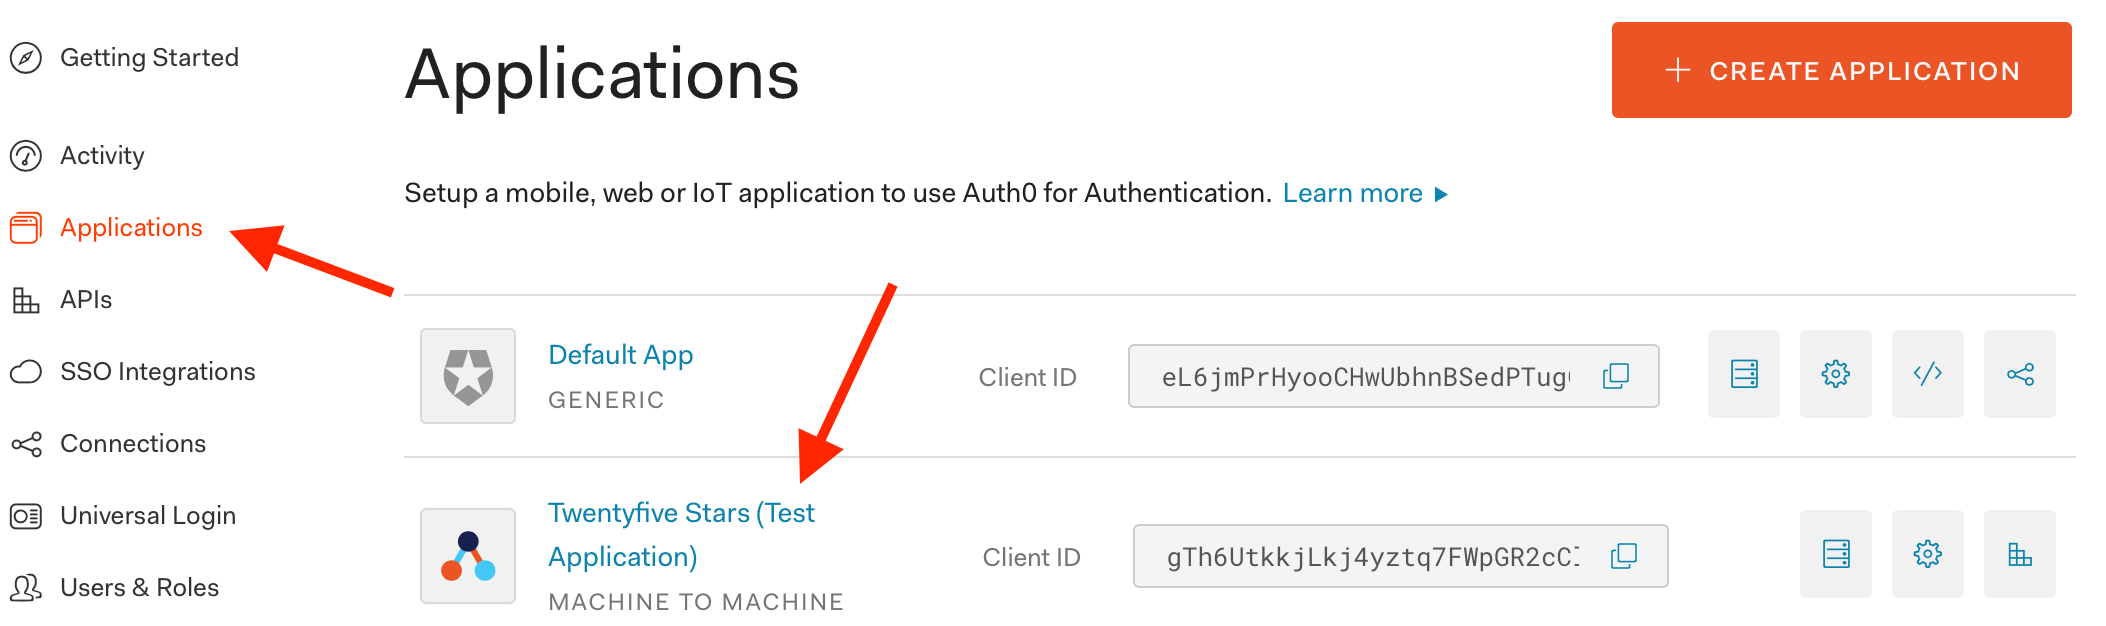 auth0-test-application.png